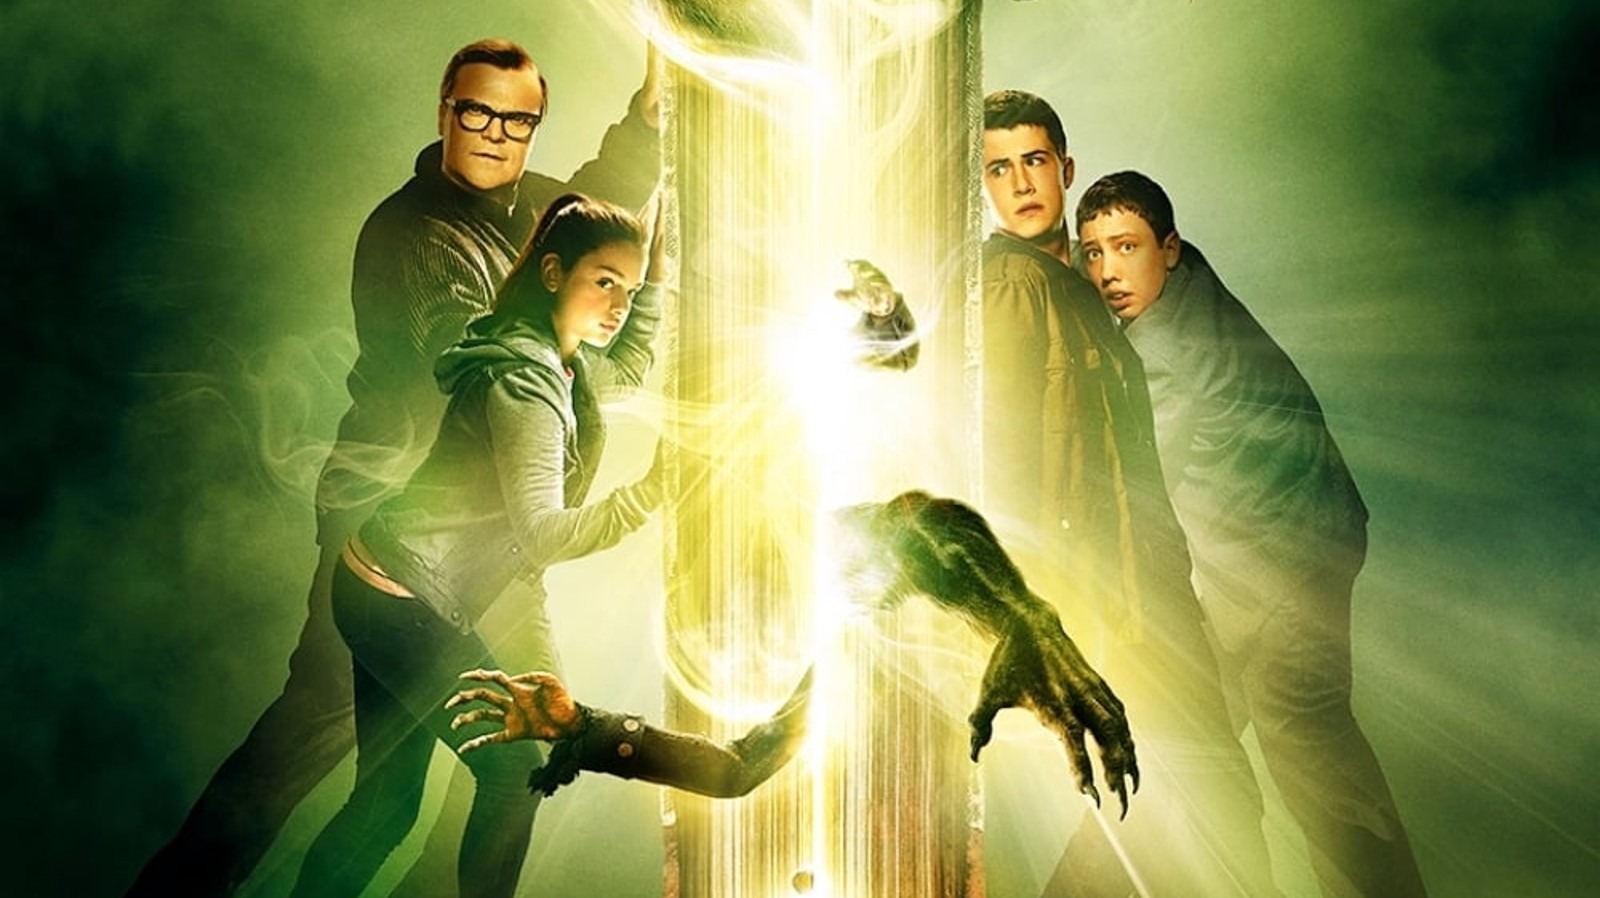 Goosebumps Heads Back To TV With A New Live-Action Series At Disney+